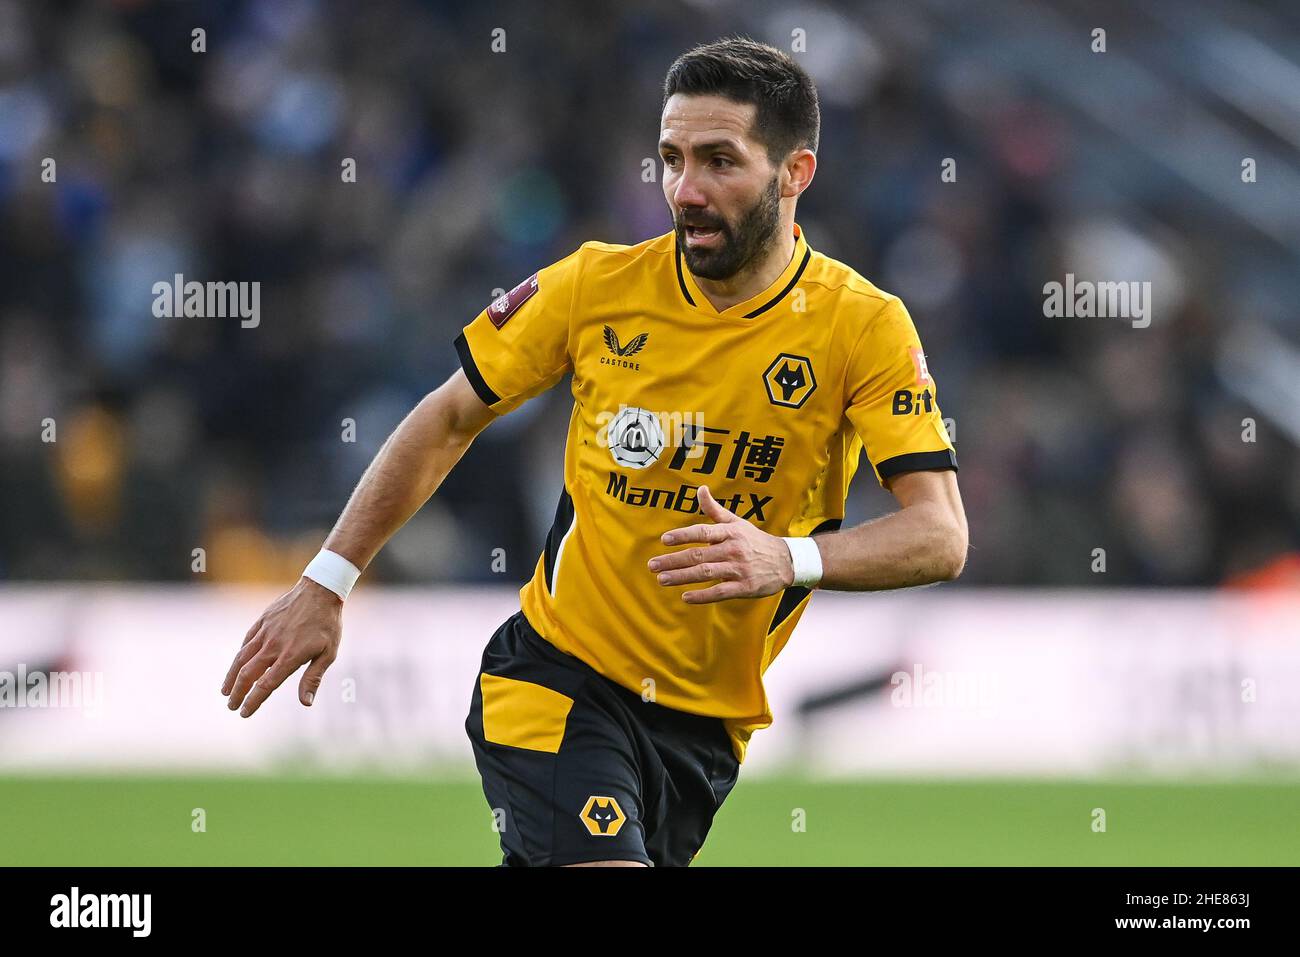 Joao Moutinho #28 of Wolverhampton Wanderers during the game Stock Photo